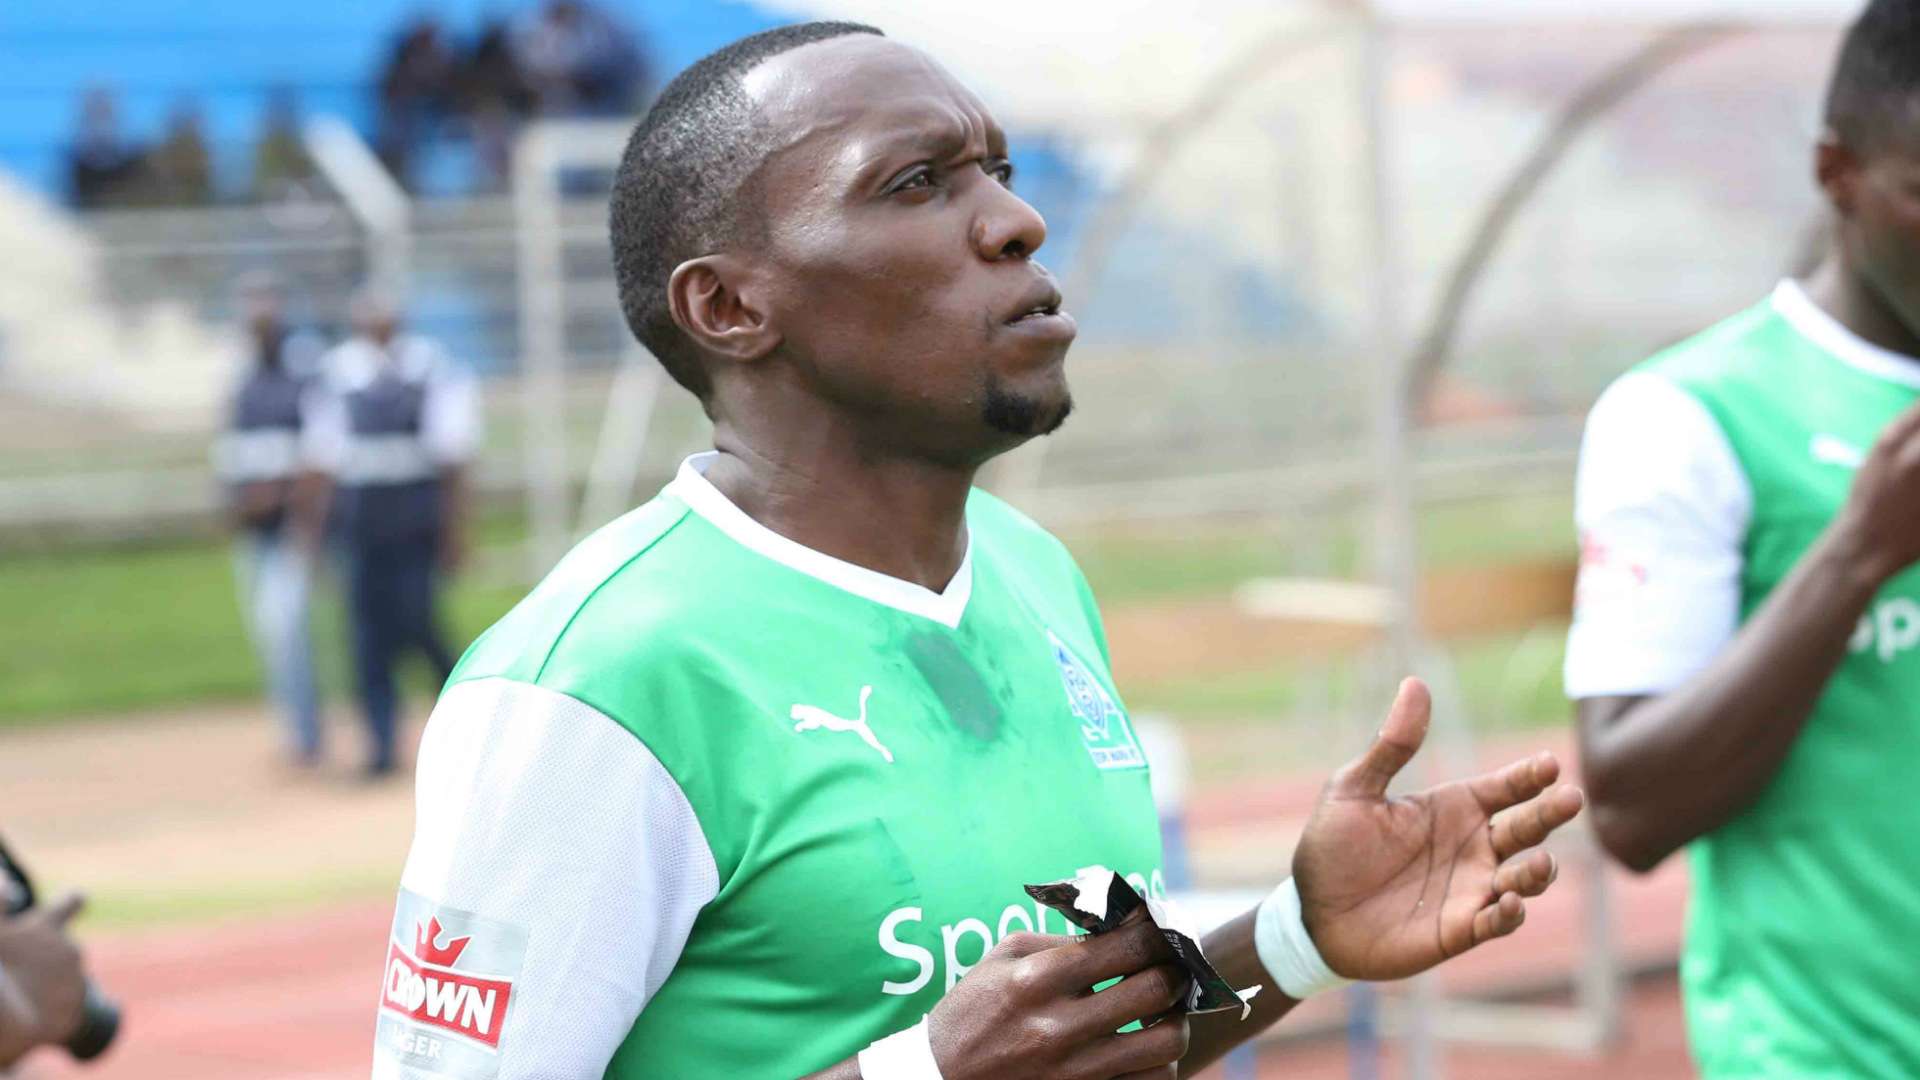 Gor Mahia striker Meddie Kagere should have at least scored two goals in first half of the duel